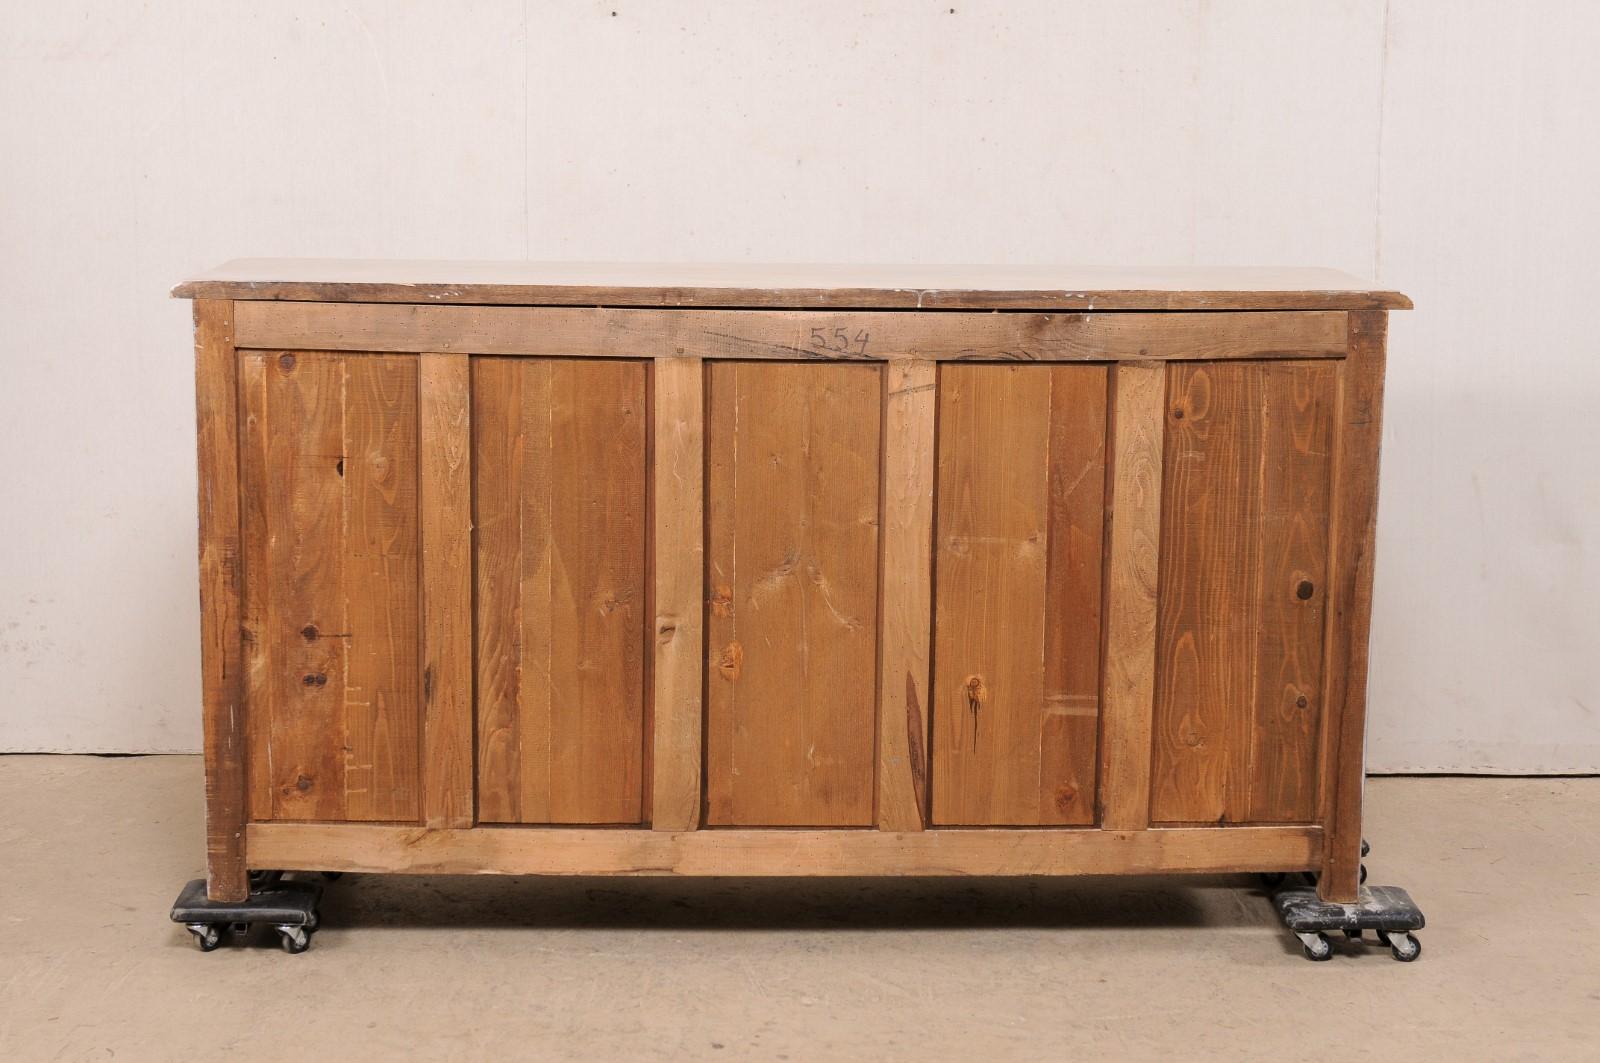 French Painted Credenza Console W/Drawers & Arched Panel Doors, Mid-20th Century For Sale 5